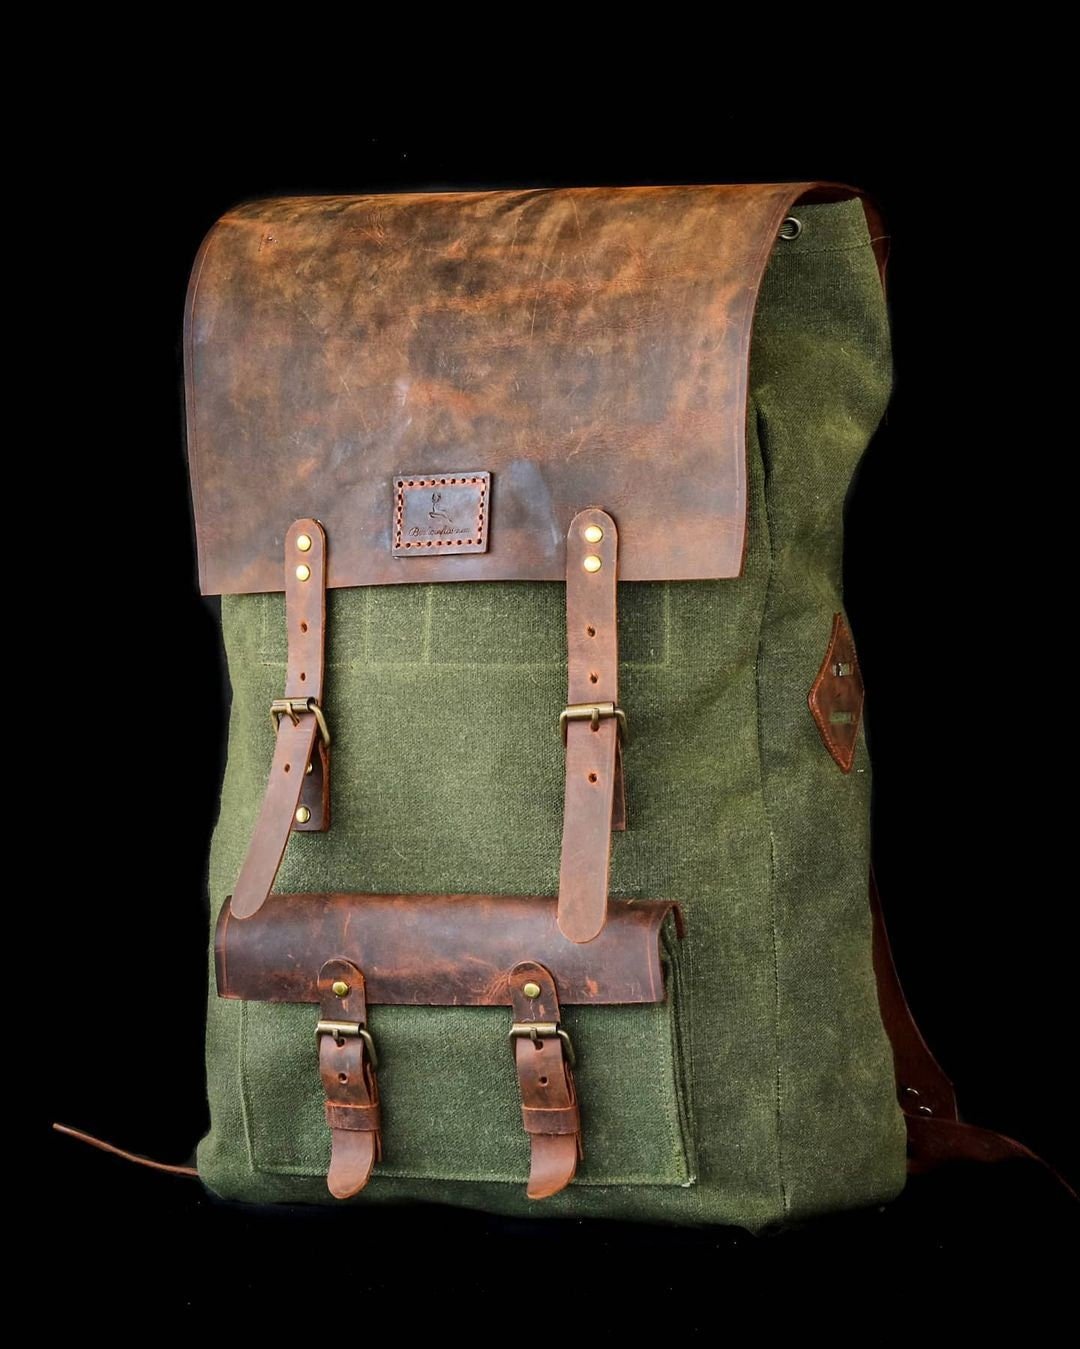 3 Colour Option, Handmade Genuine  Leather and Waxed Canvas Backpack for Travel, Camping | 25 Liters | Personalization for your request bushcraft - camping - hiking backpack 99percenthandmade Green 10 